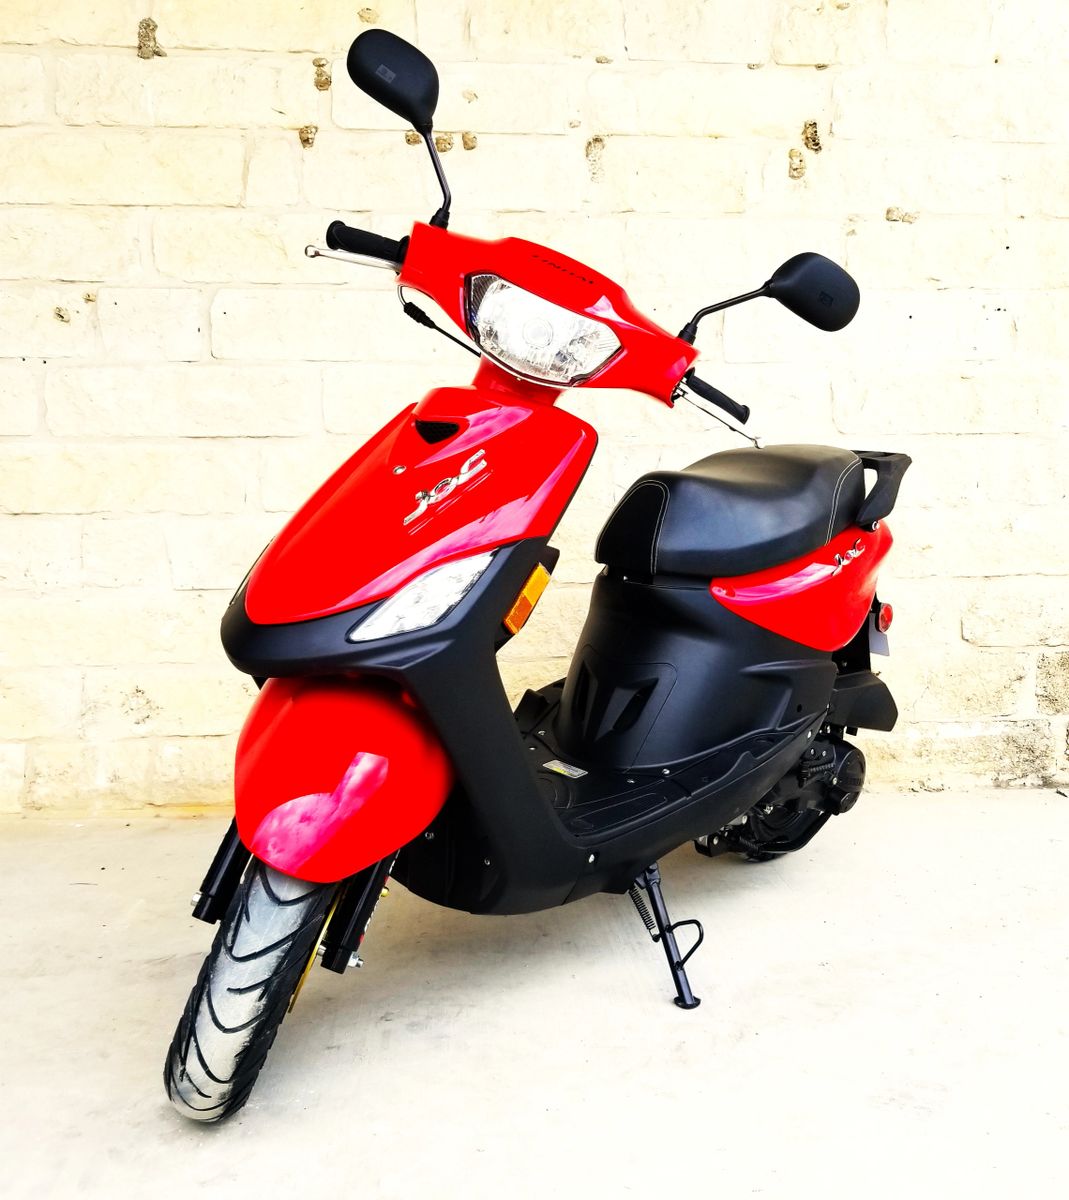  TAO 49cc / 50cc street legal fully automatic scooter moped with  a Matching trunk - Choose your color, Black Blue Red Green and Pink :  Automotive